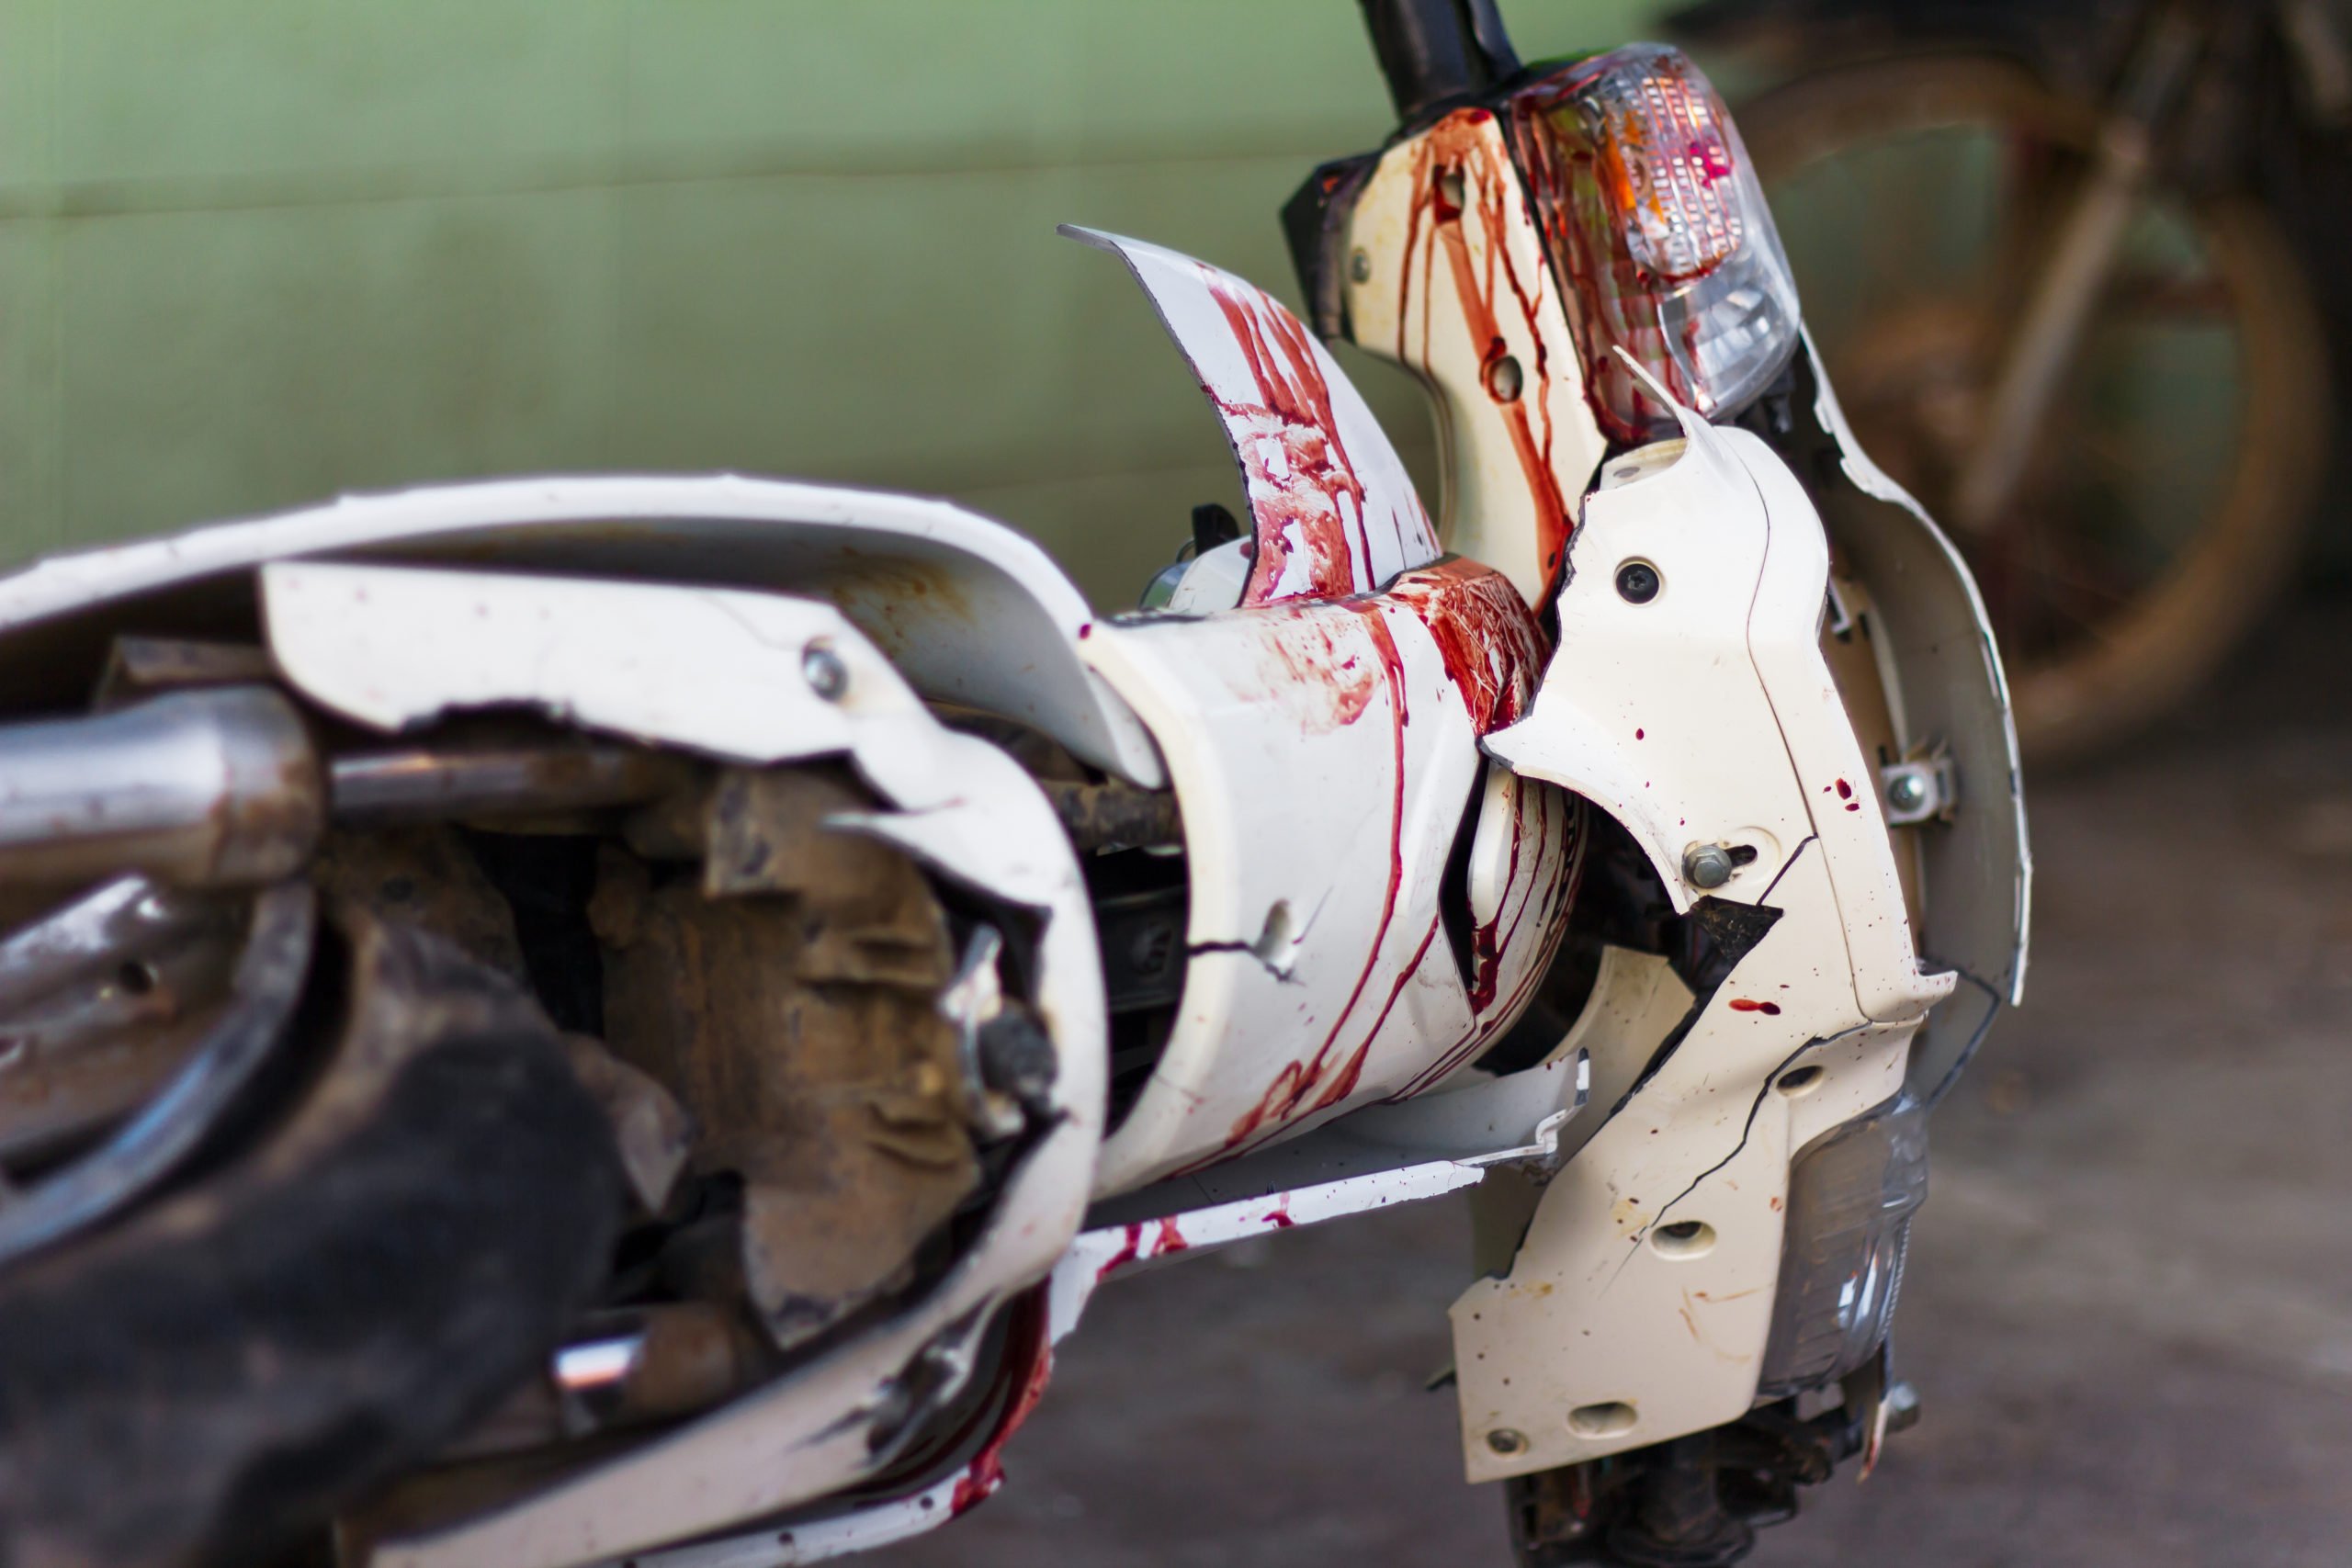 Can You Sue for Wrongful Death in a Motorcycle Accident Claim